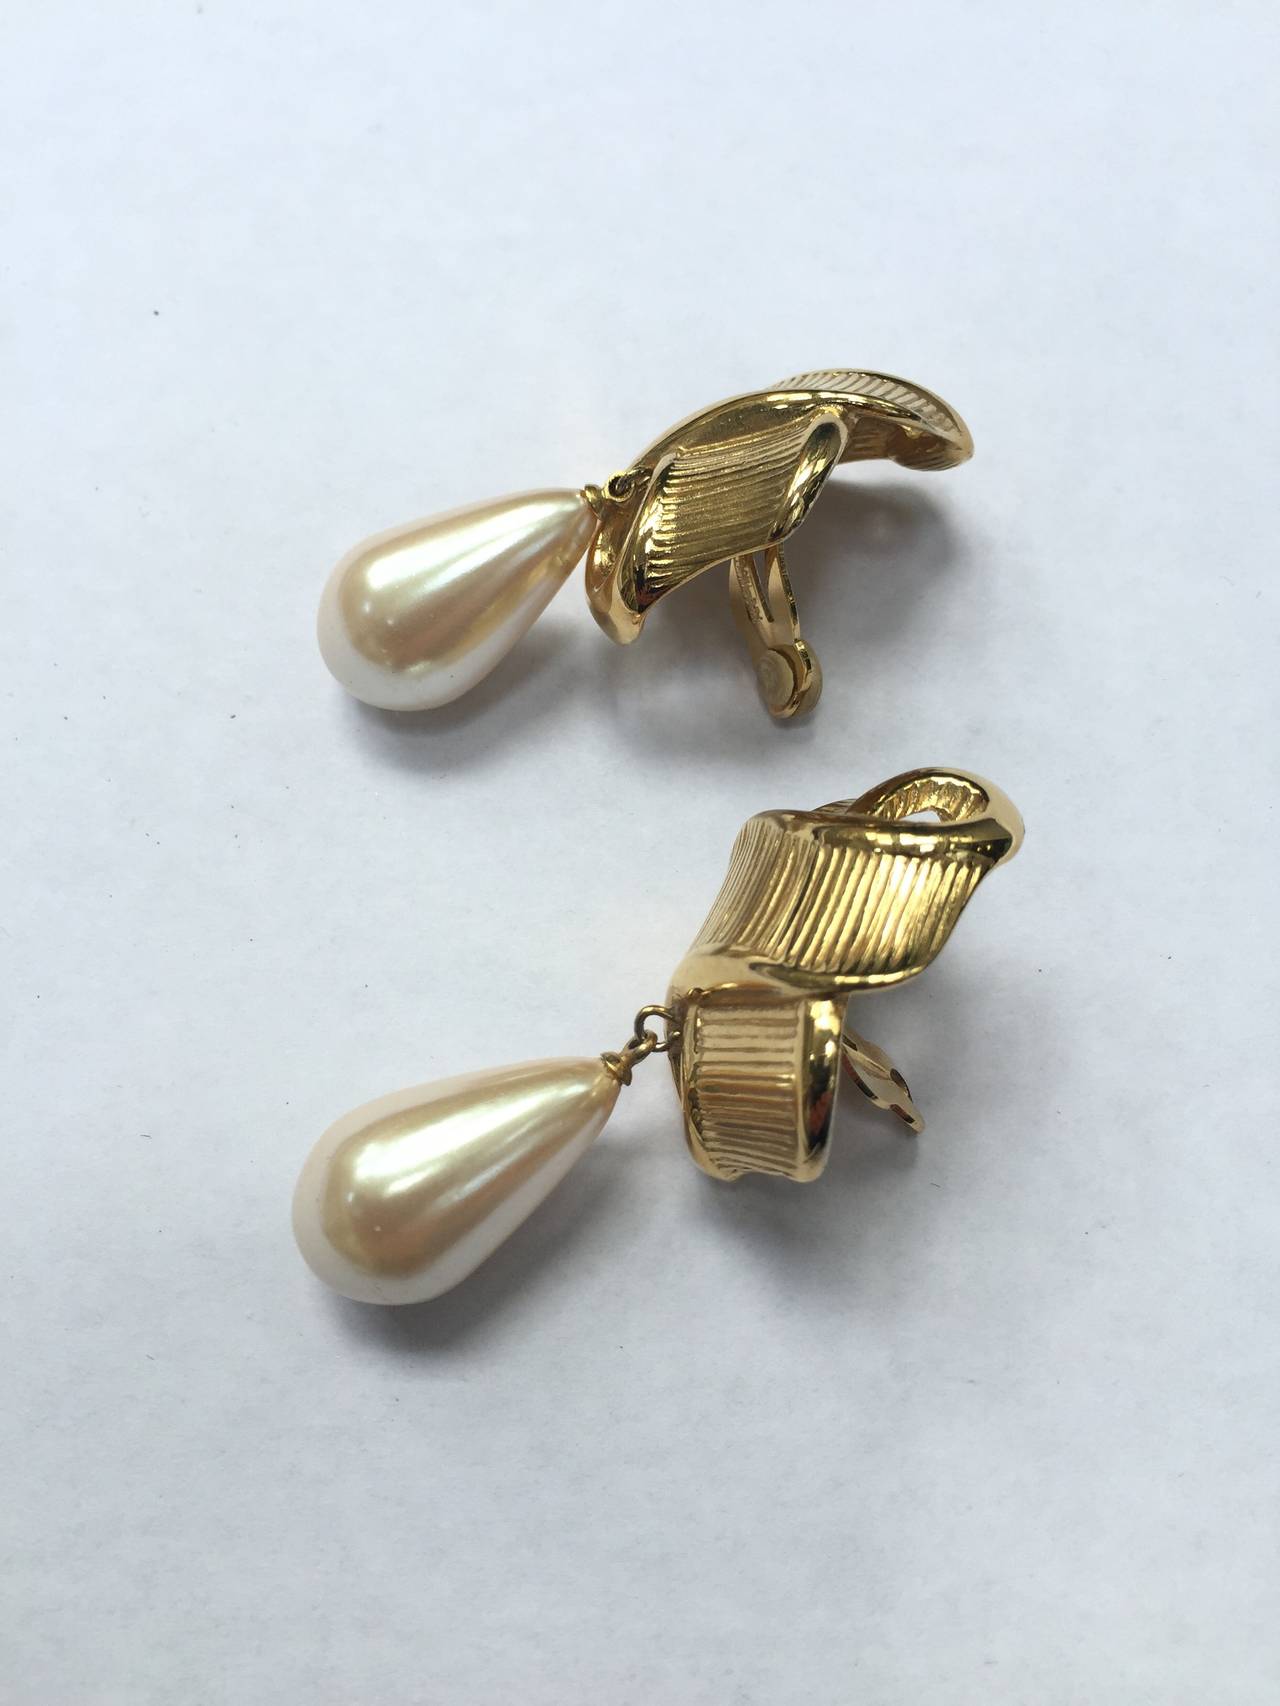 Givenchy 1980s pearl drop clip earrings.
One earring is missing the lobe cushion. 
Measurements are:
2. 1/4